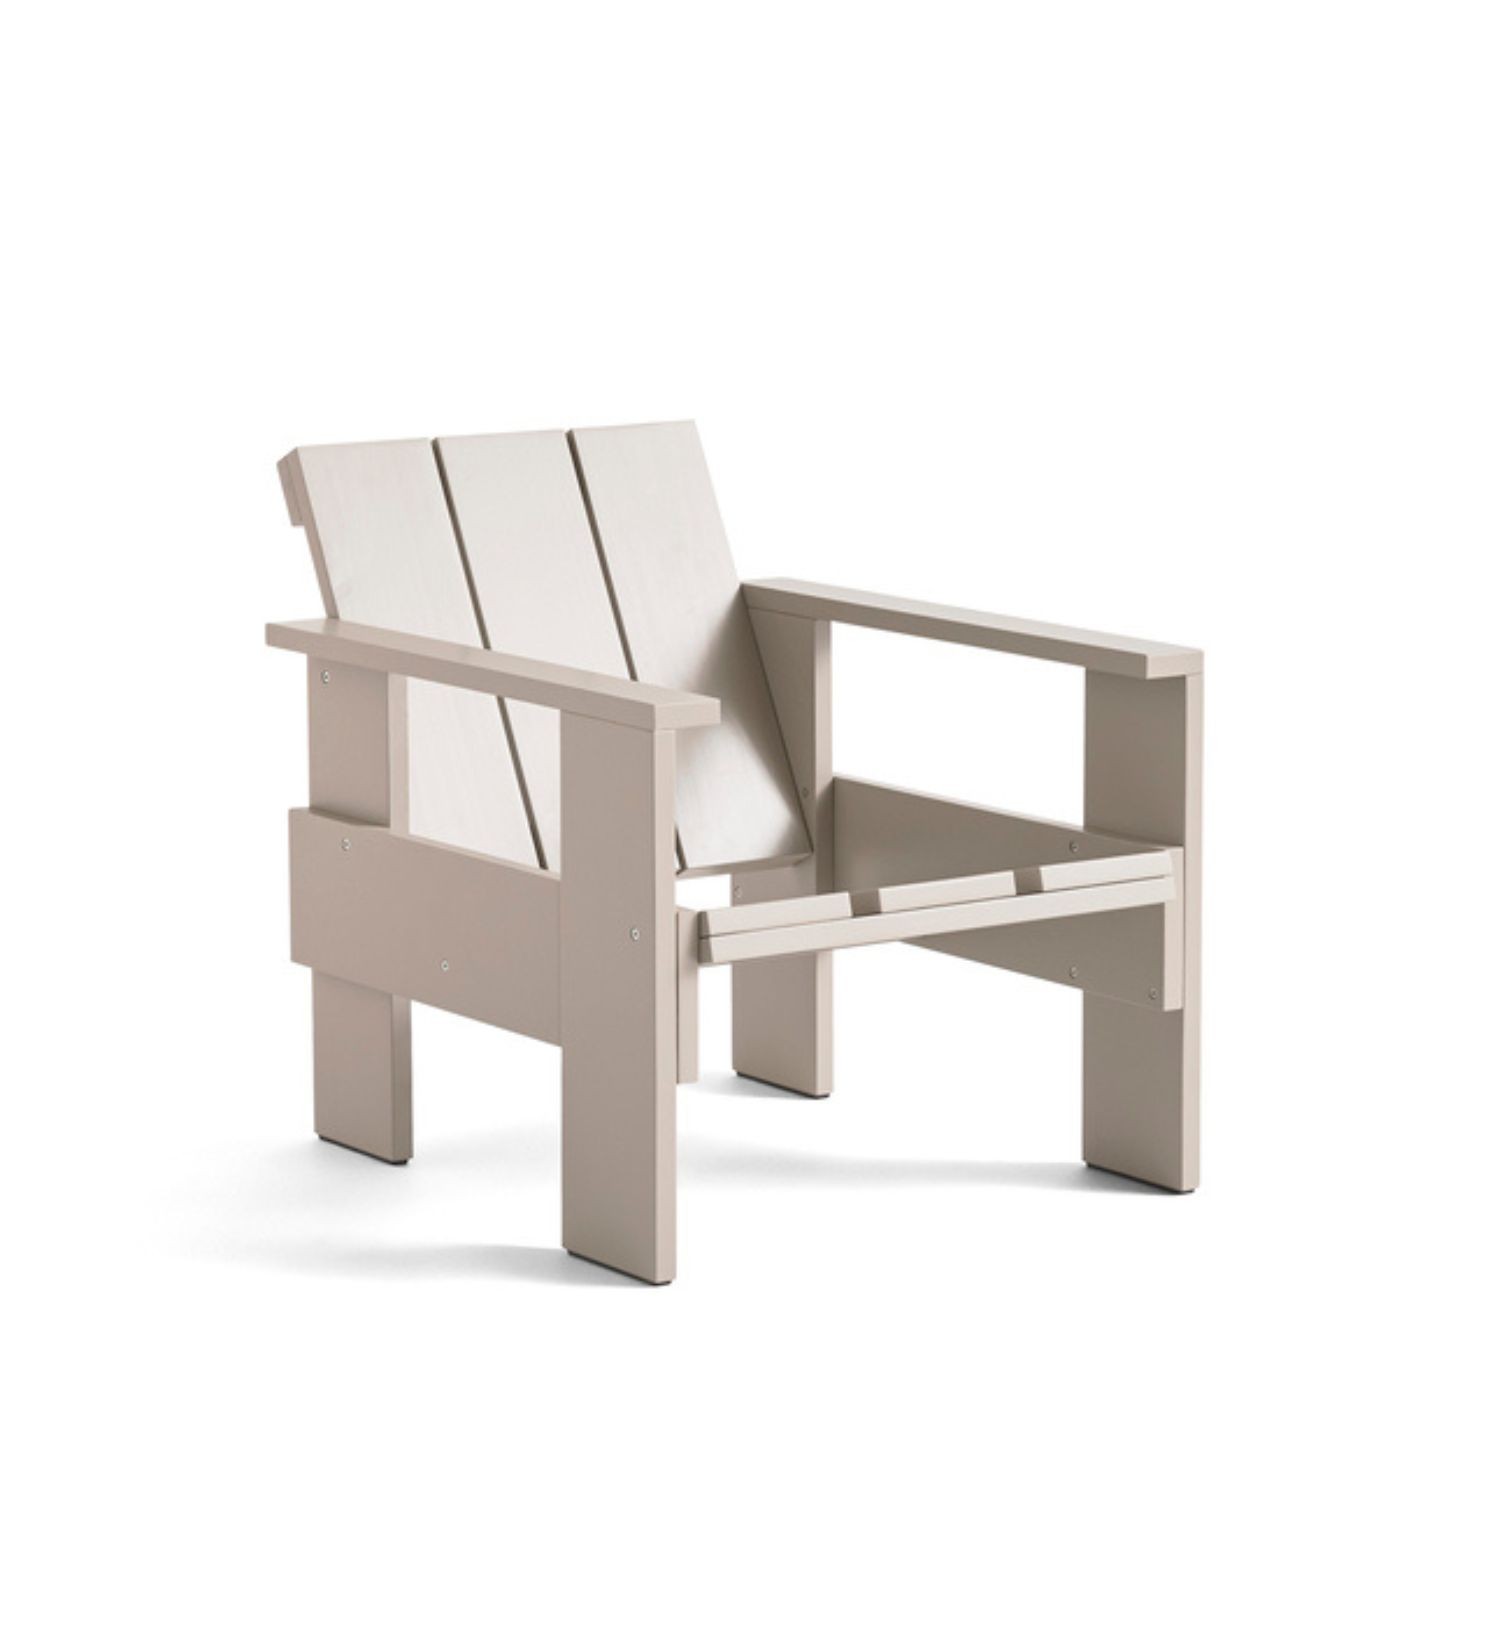 Fotel ogrodowy Crate Lounge Chair marki Hay